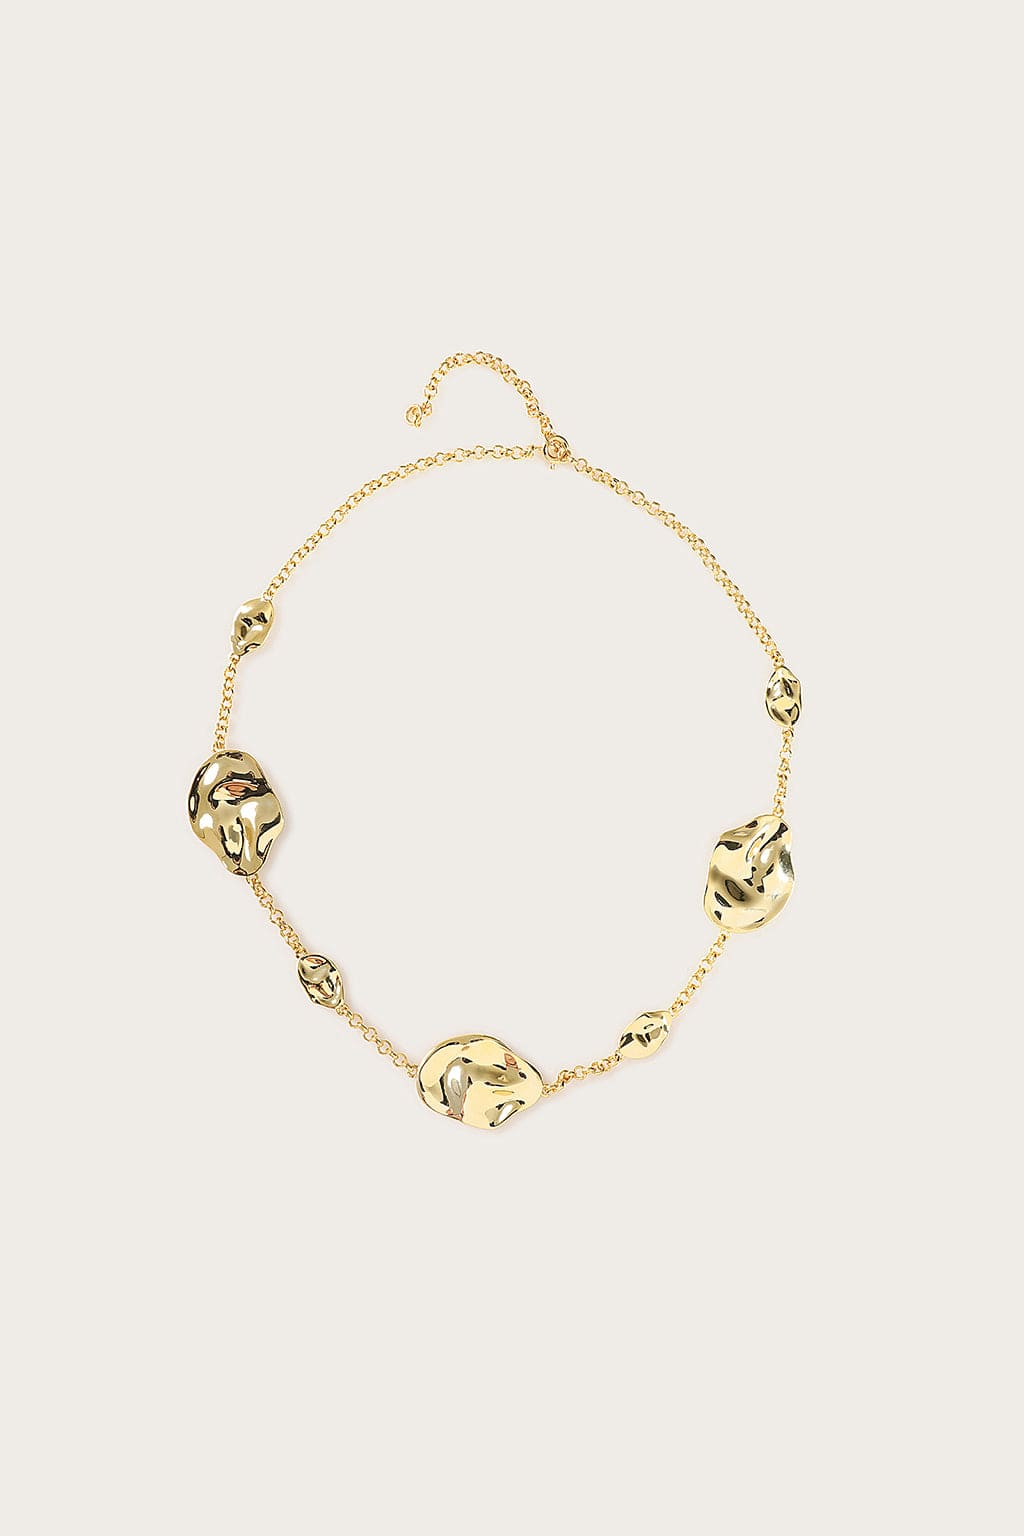 KARIA Hammered Effect Oval Charm Gold Necklace